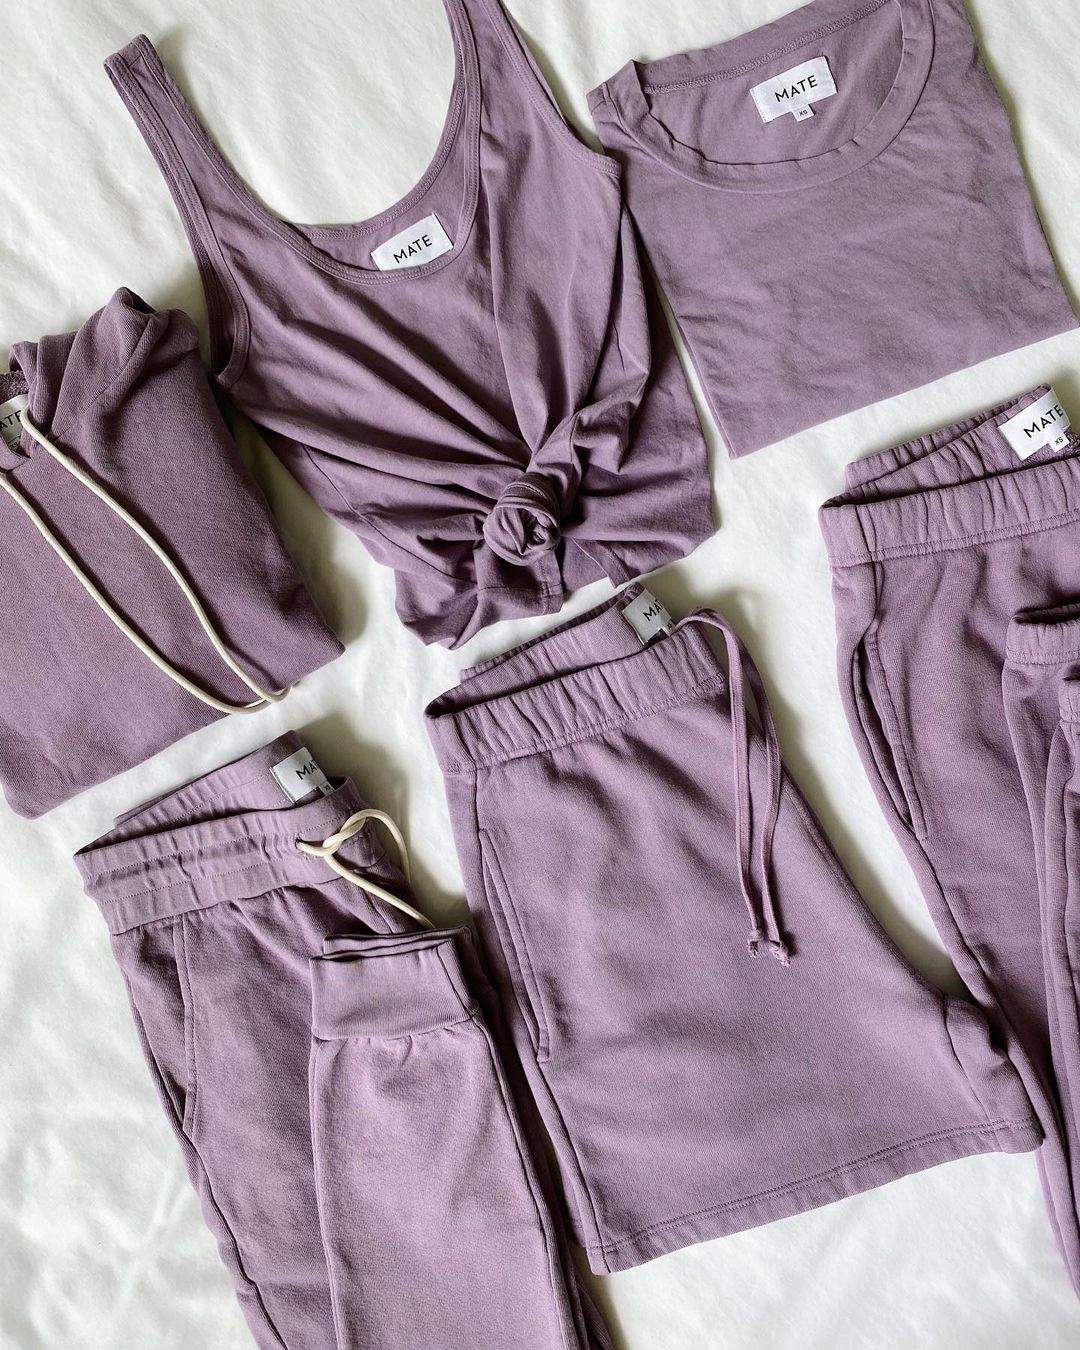 Conscious Cozies: 14 Sustainable, Healthy, Ethical Pajamas You'll Love  Wearing — SHE CHANGES EVERYTHING